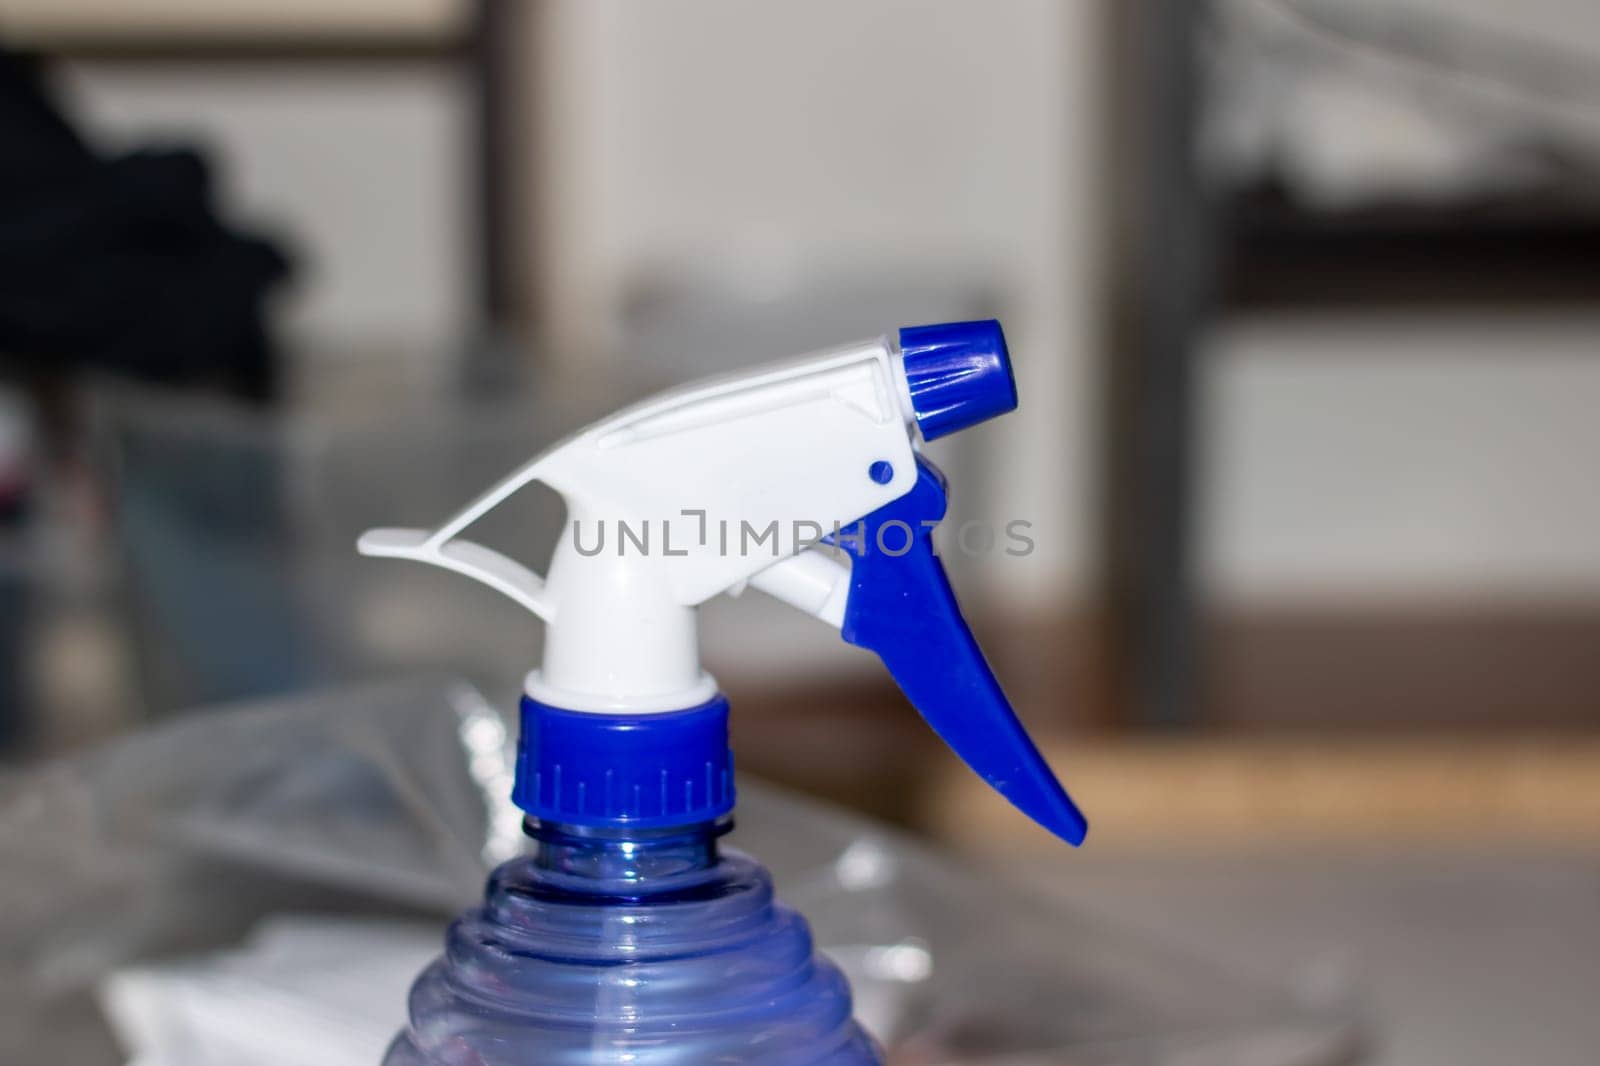 An electric blue and white spray bottle filled with liquid is resting on a table. The bottle contains a waterbased fluid, perfect for cleaning glass and plastic surfaces